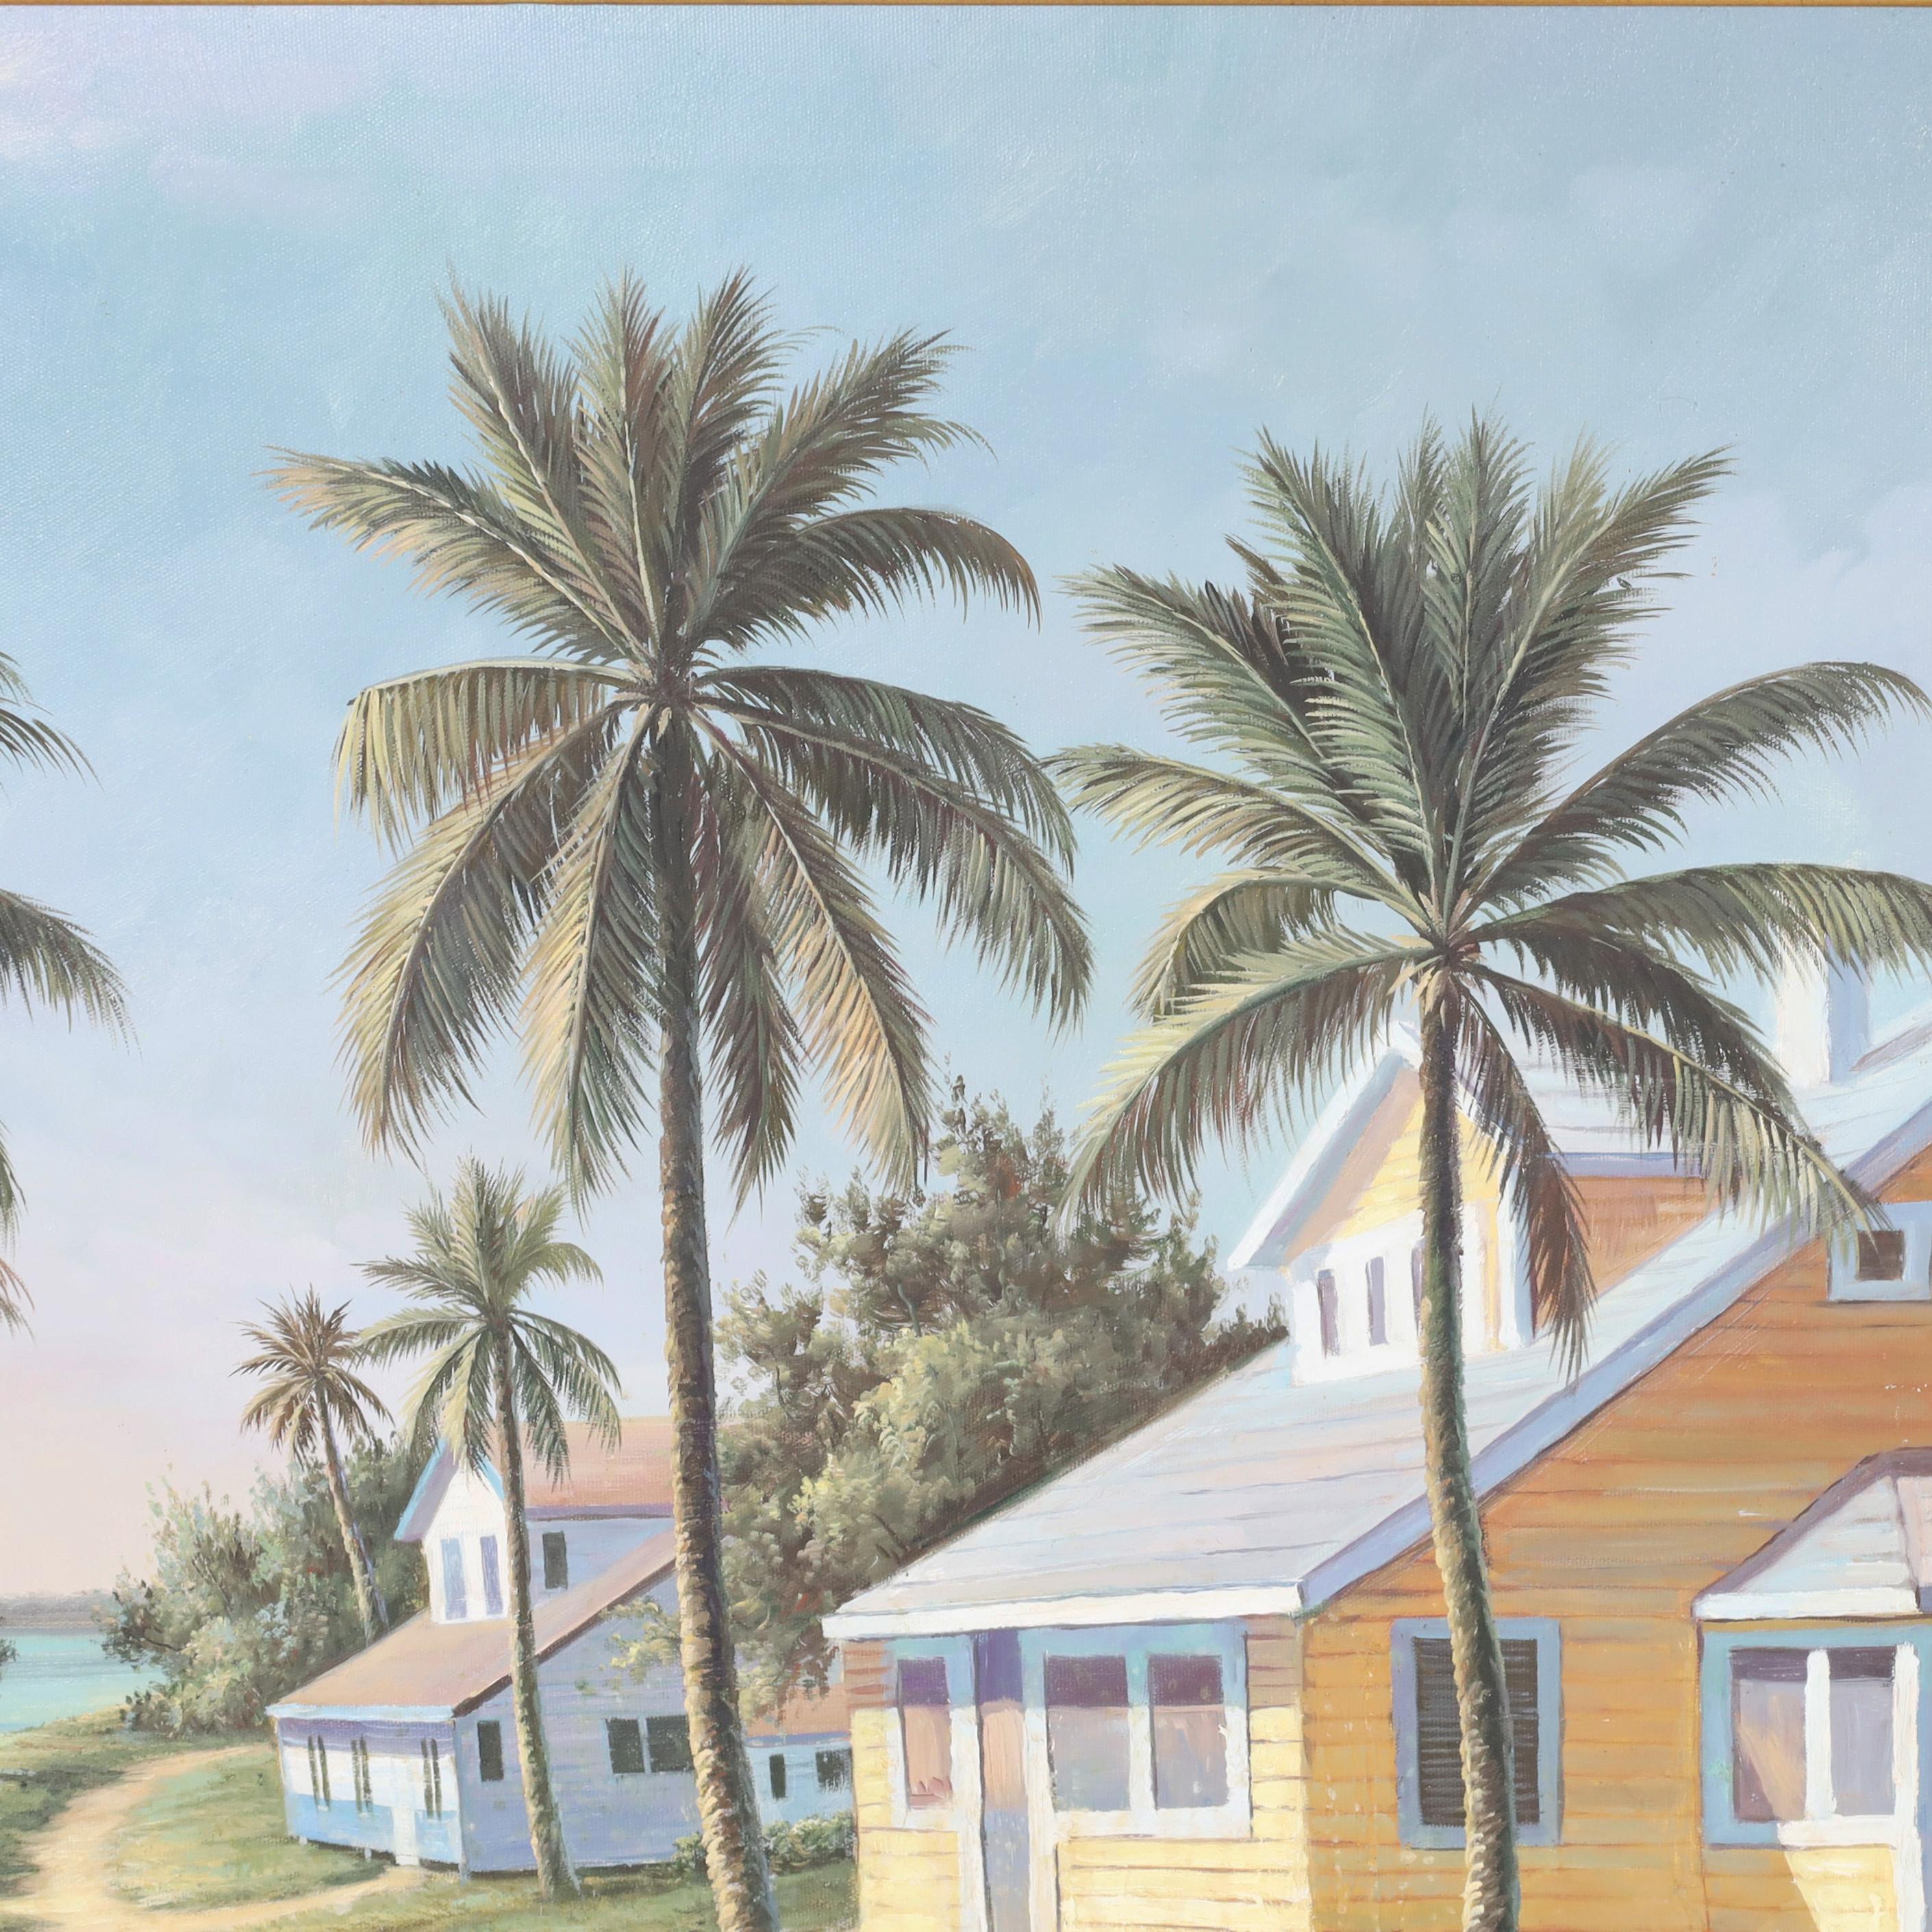 Transporting oil painting on canvas of a tropical bayscape with a boat, houses and palm trees on a sunny day highlighting light and shadow. Signed J. Drooks in the lower right and presented in a wood frame.